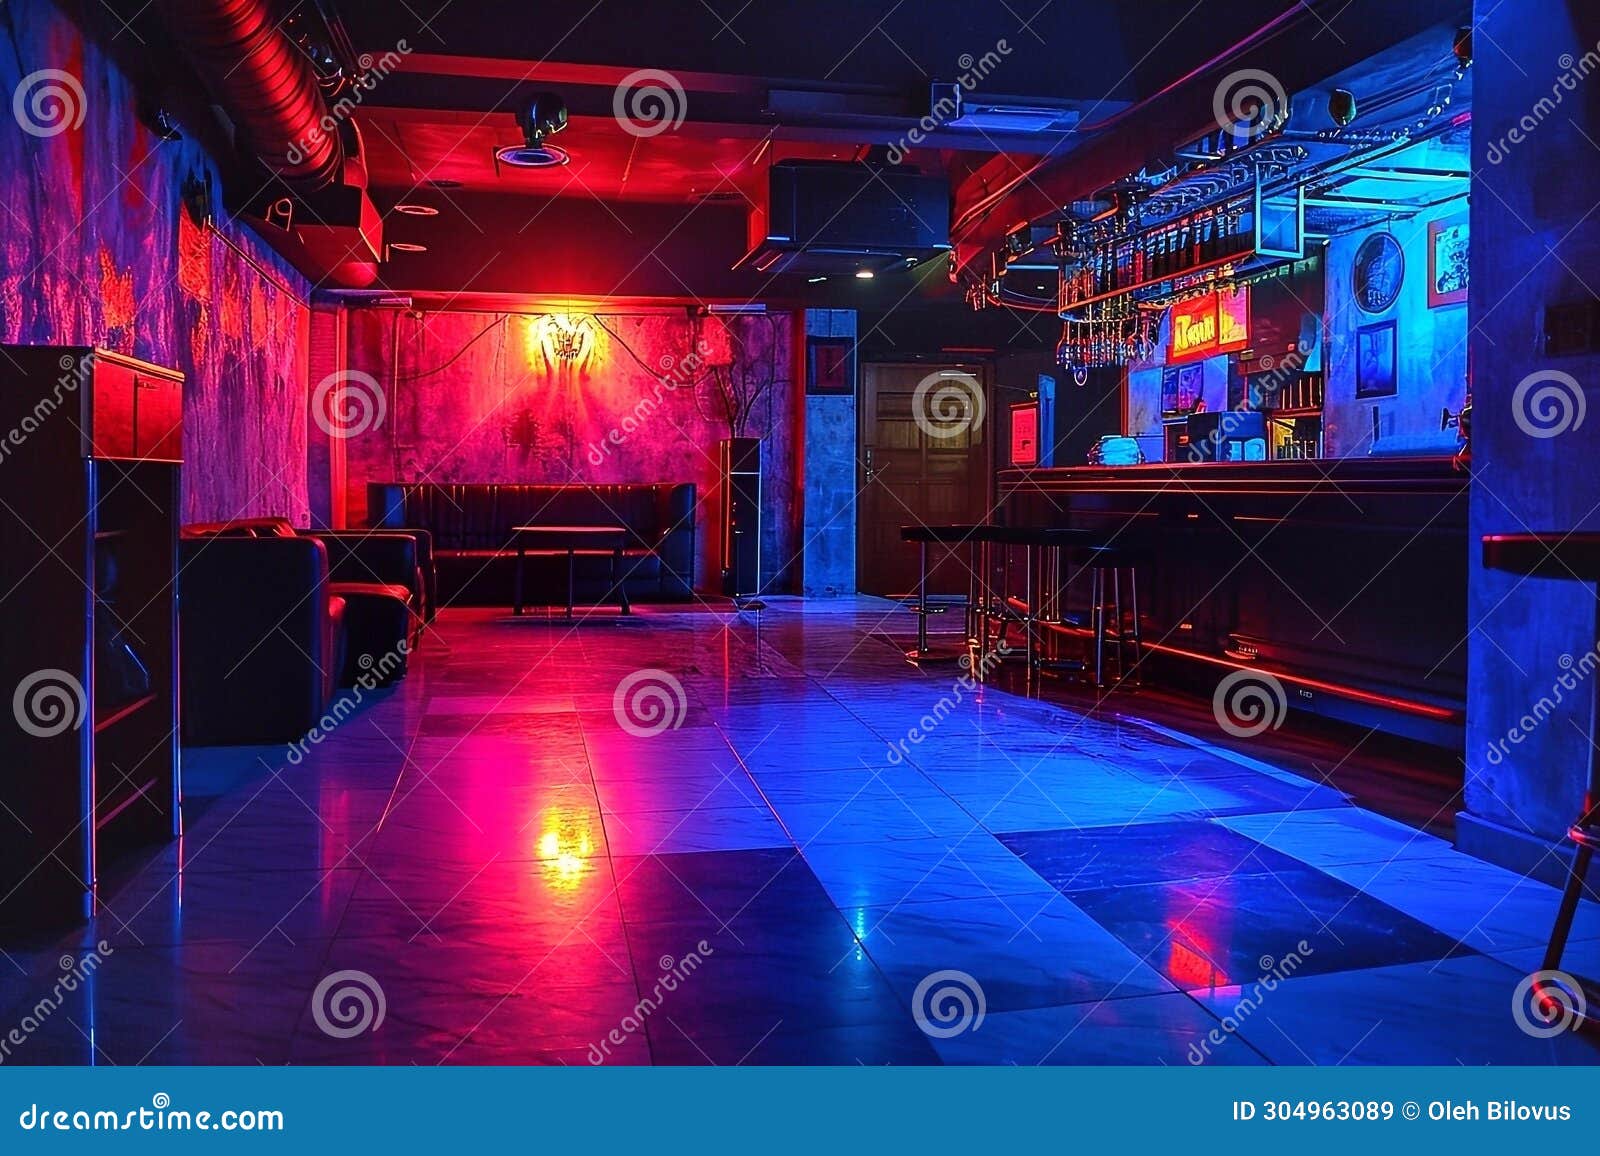 Interior of a Night Club with Bright Red and Blue Lighting. Stock Image ...